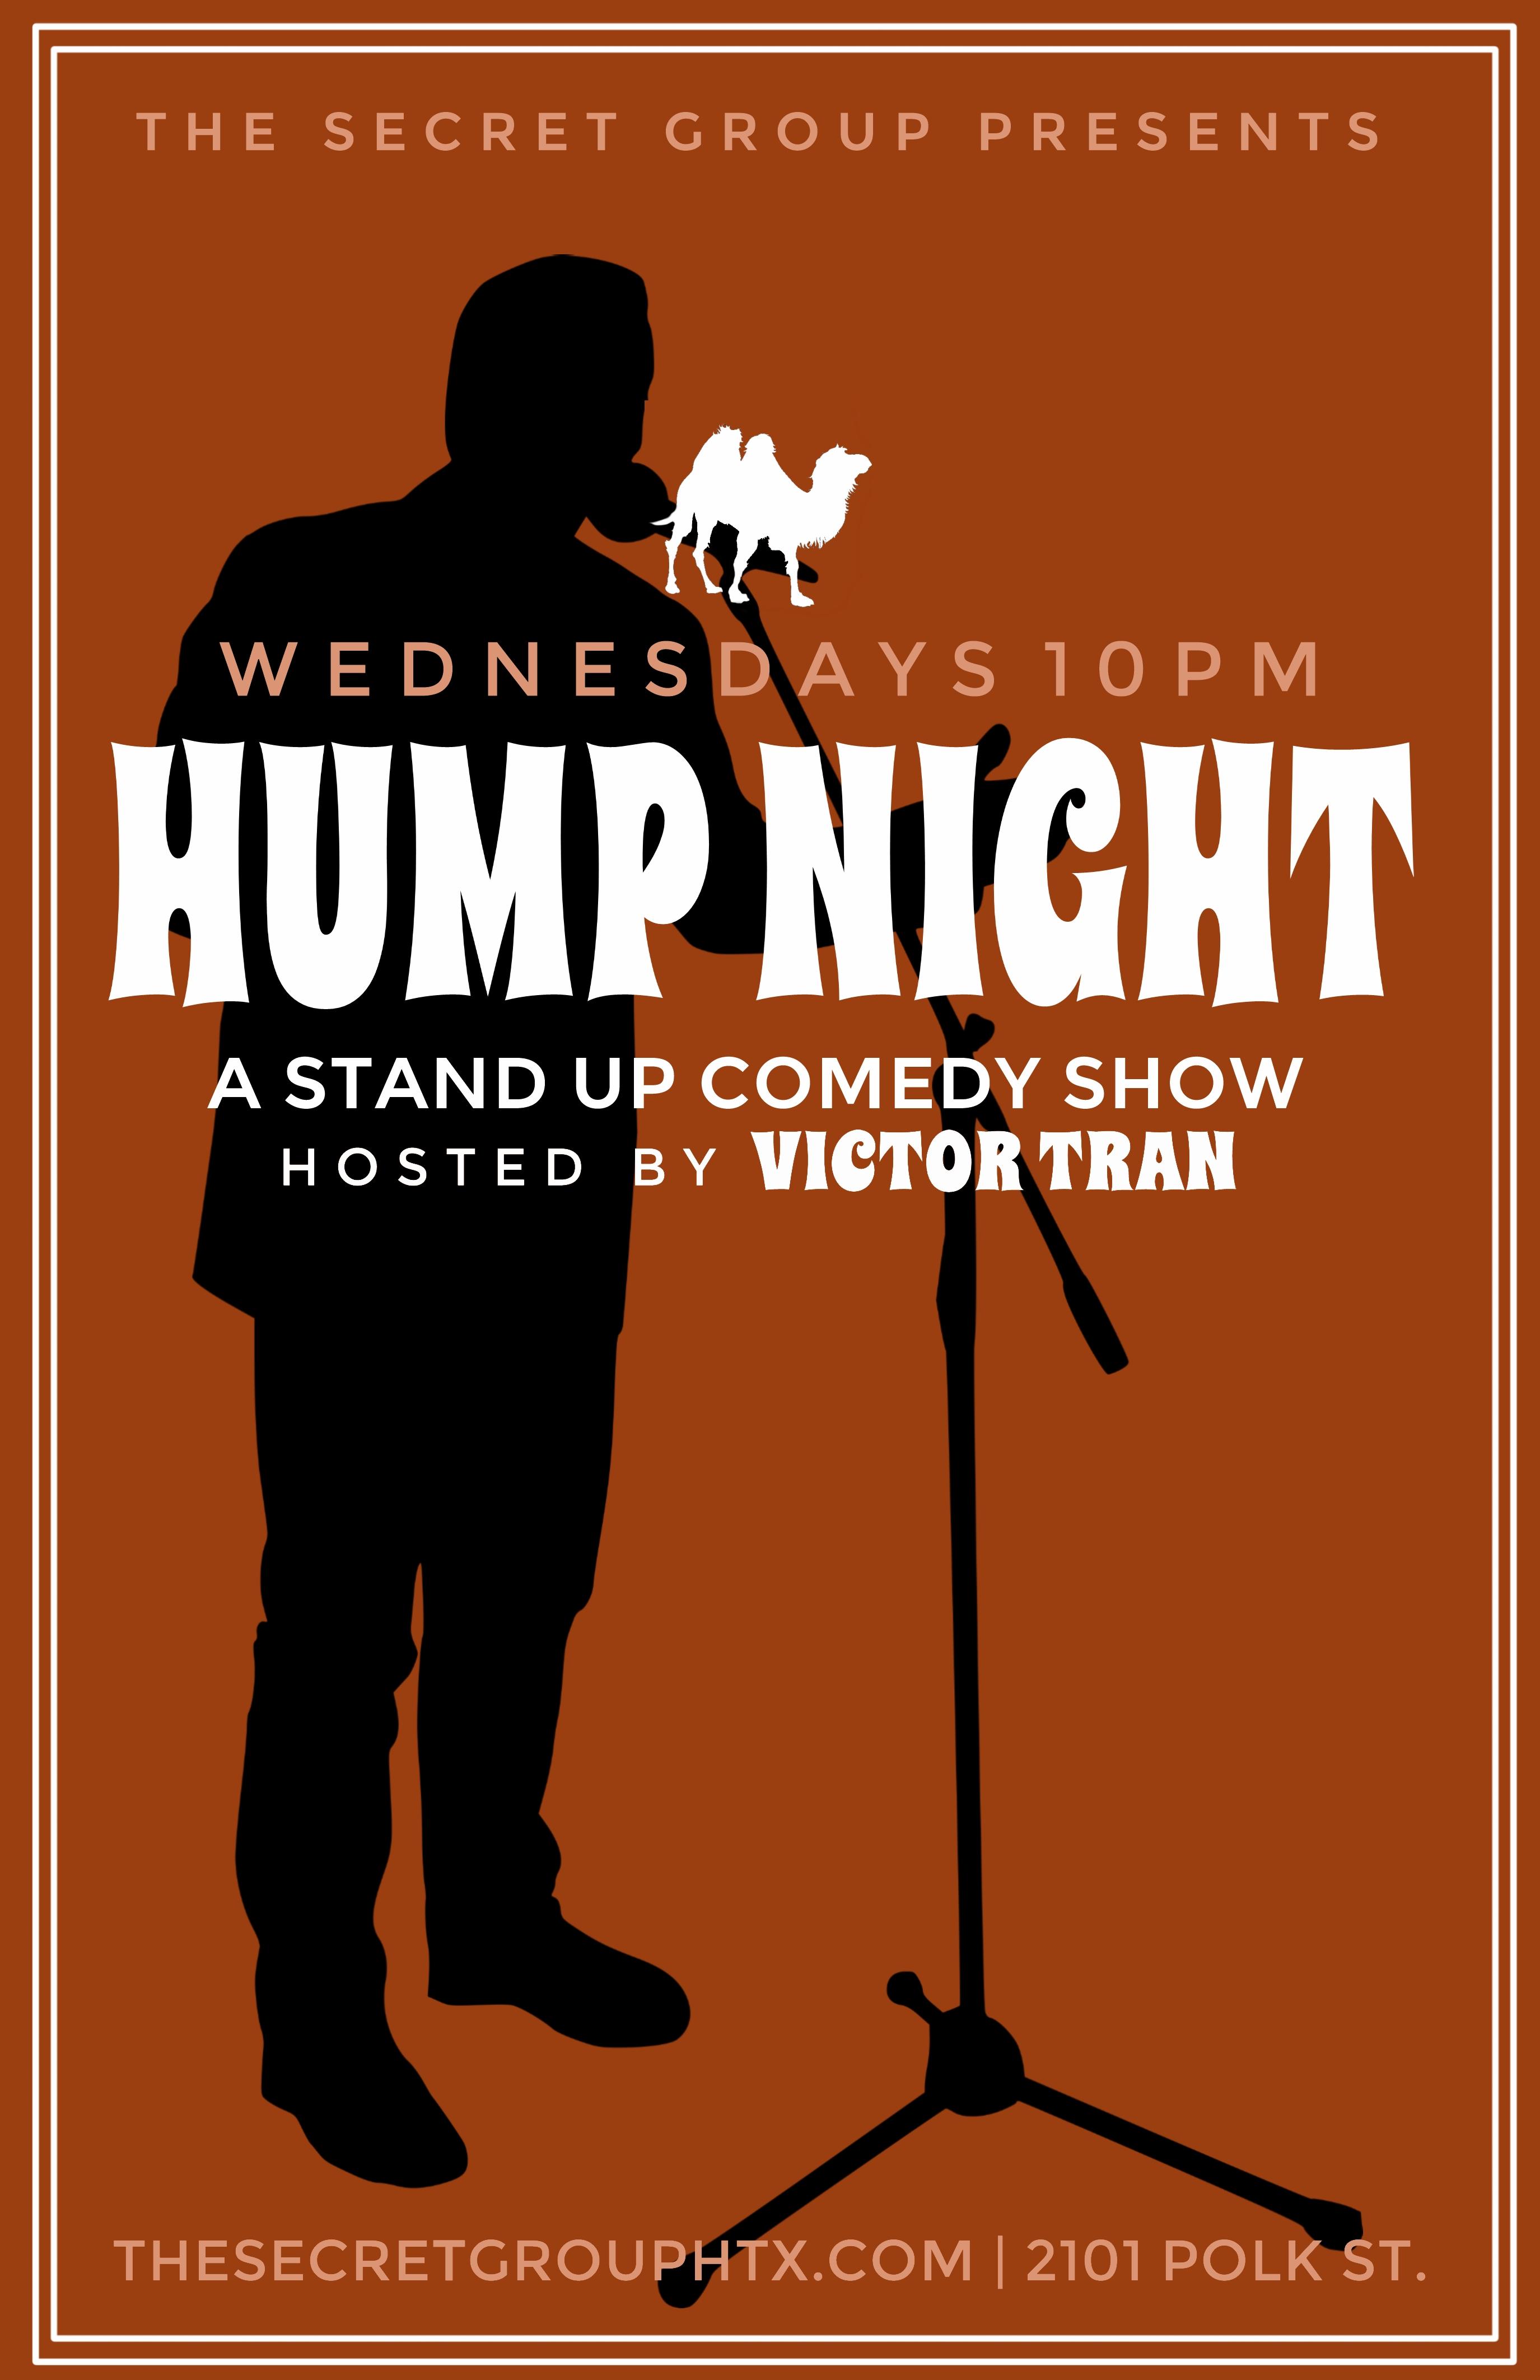 Hump Night: A Stand Up Comedy Show